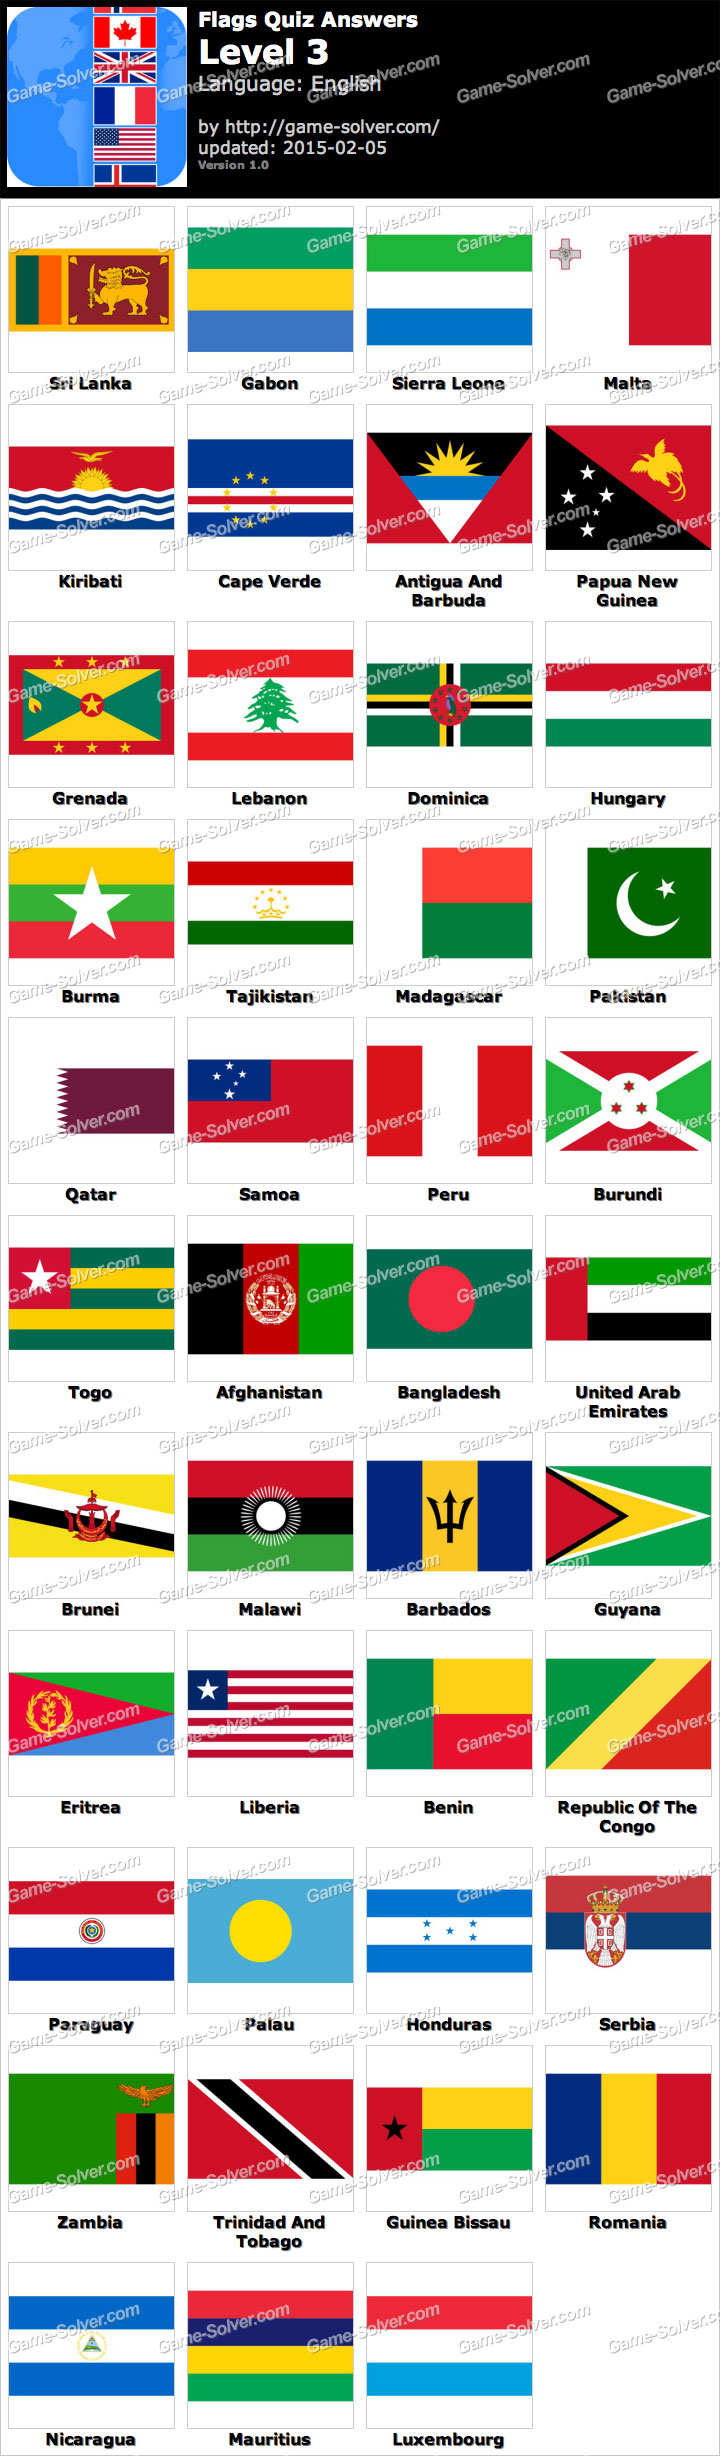 Flags quiz - guess the flag